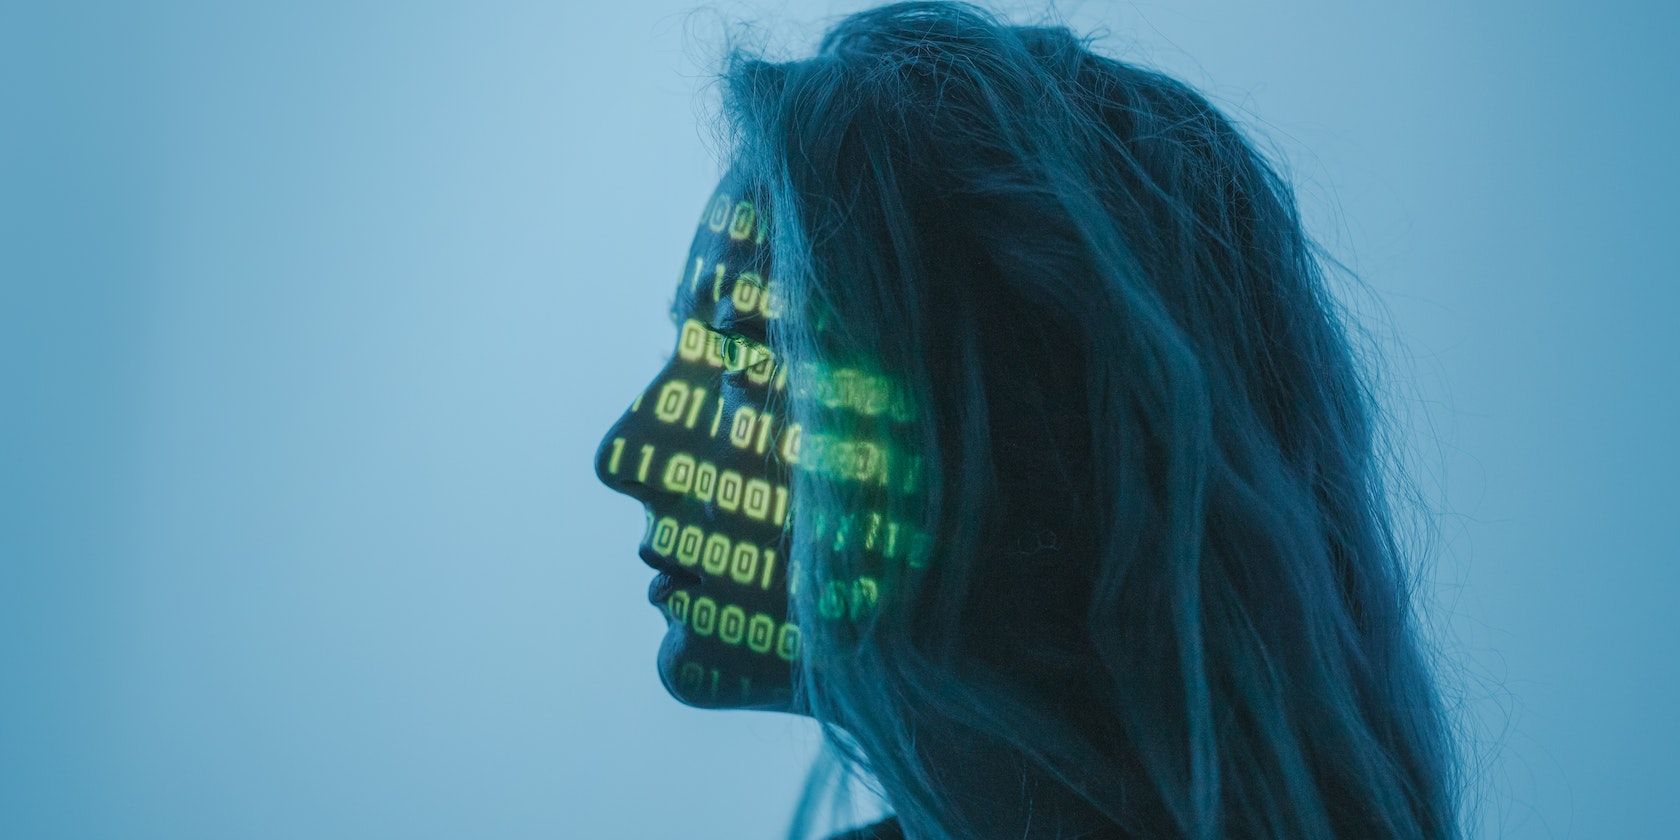 A woman with binary codes on her face